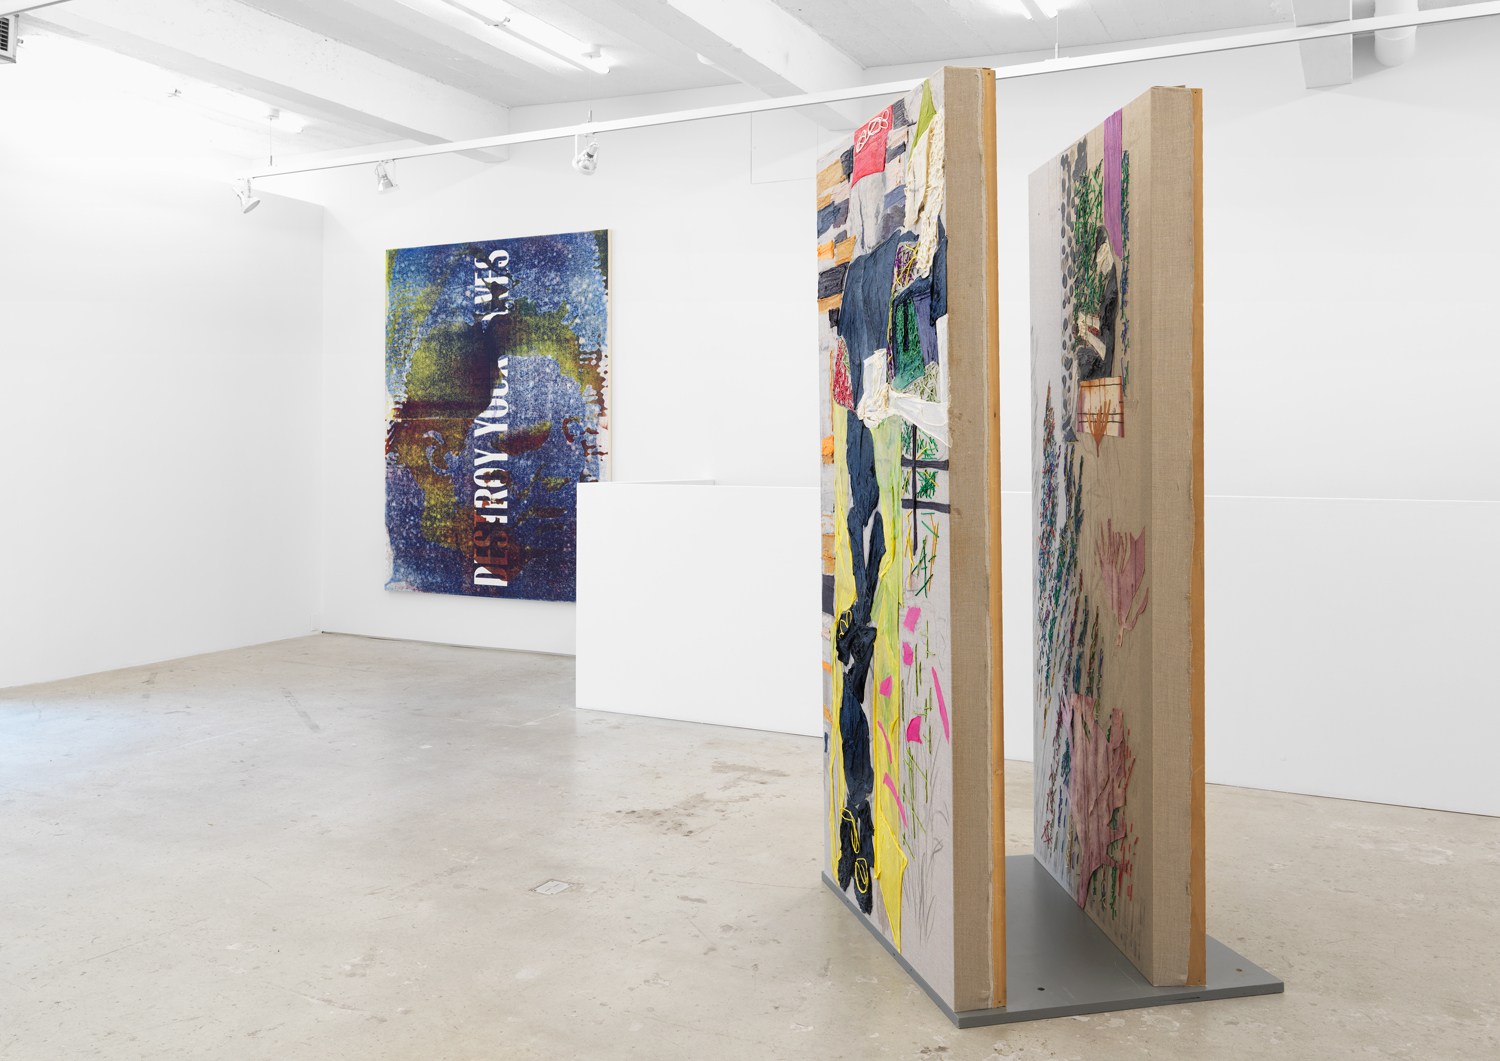 Israel Lund, Untitled (SEVERED HEAD DESTROY YOURSELVES) (left), 2018, acrylic on raw canvas, 88h x 68w in.  Dona Nelson, By The Yard (right), 2016, collage, dyed cheesecloth, muslin, and acrylic mediums on linen panel mounted on plywood base, panel: 81.5 x 36 in, base: 38 x 32 in.